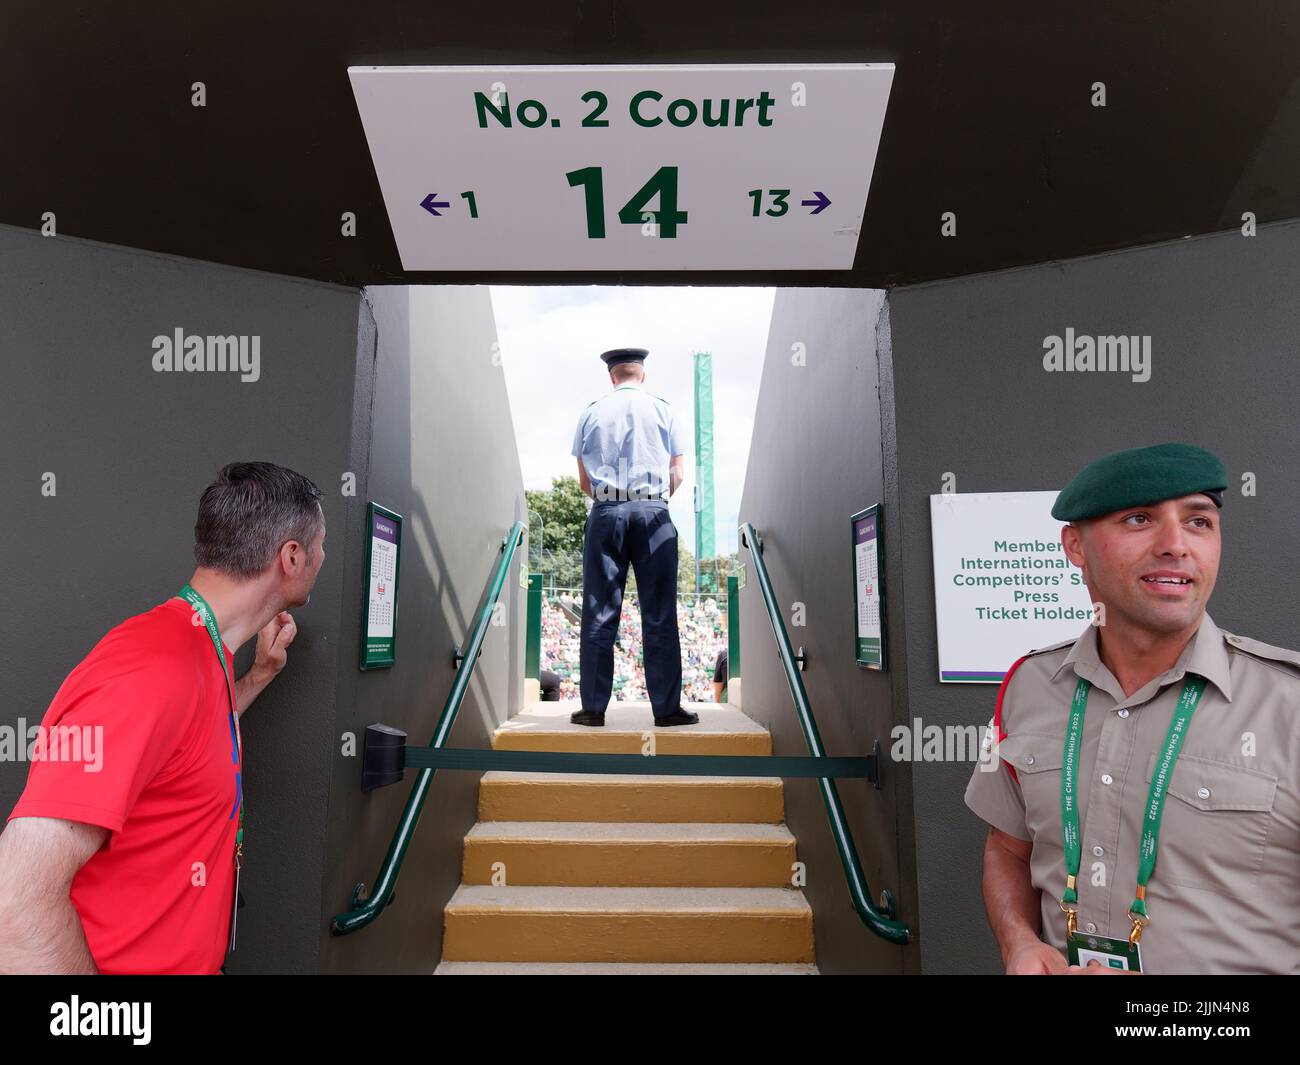 Wimbledon, Greater London, England, July 02 2022: Wimbledon Tennis Championship. An official guards one of the entrances to number two court as two ot Stock Photo